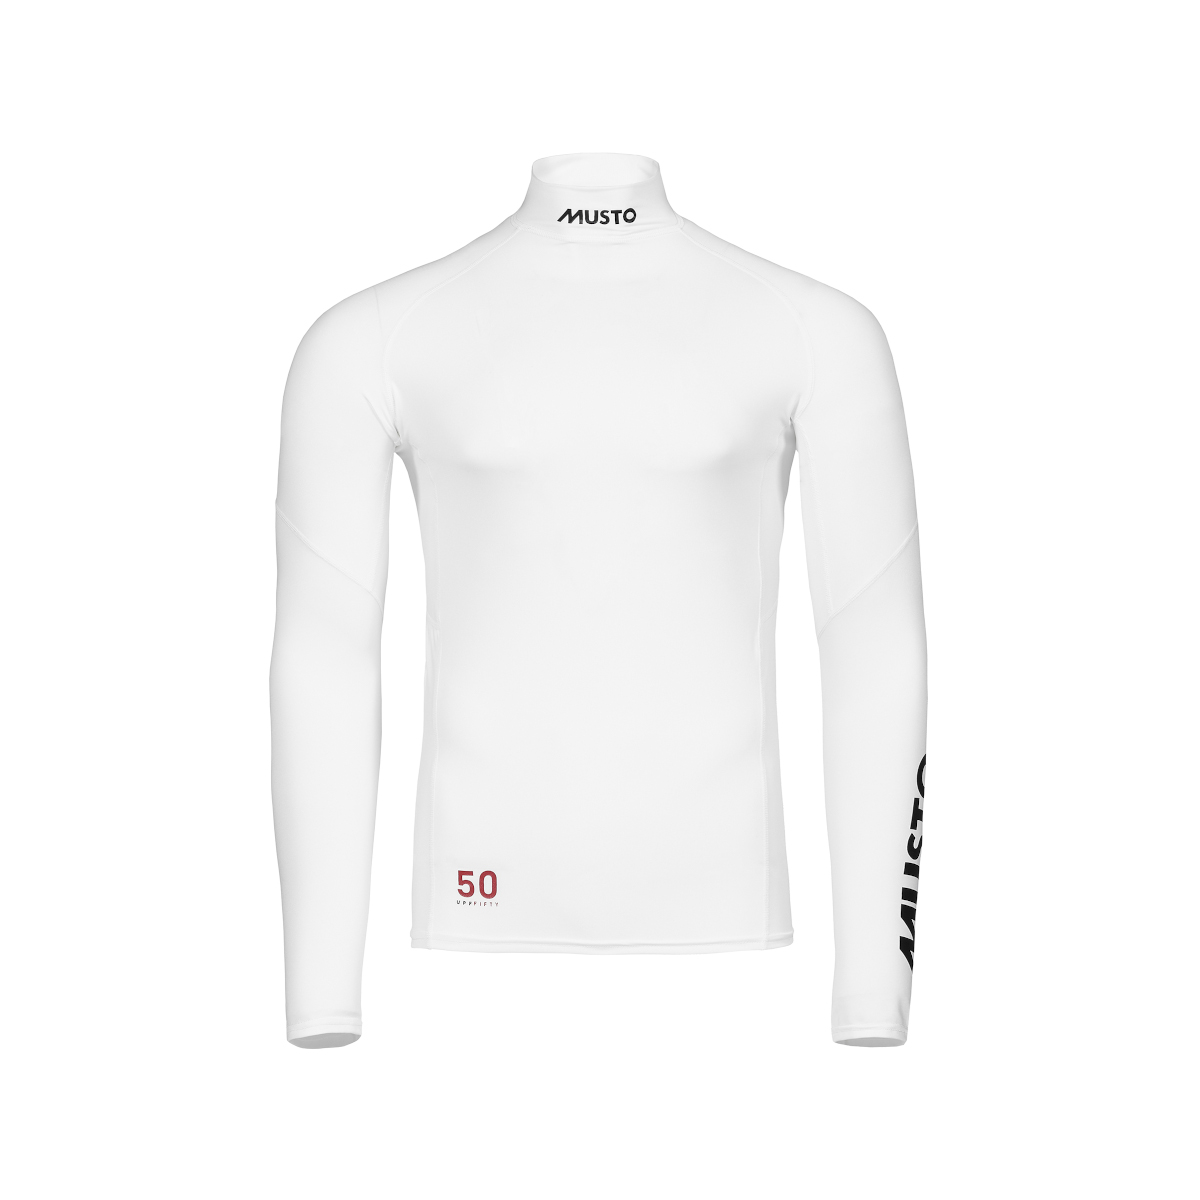 Musto Championship Rash Guard manches longues homme blanc, taille L